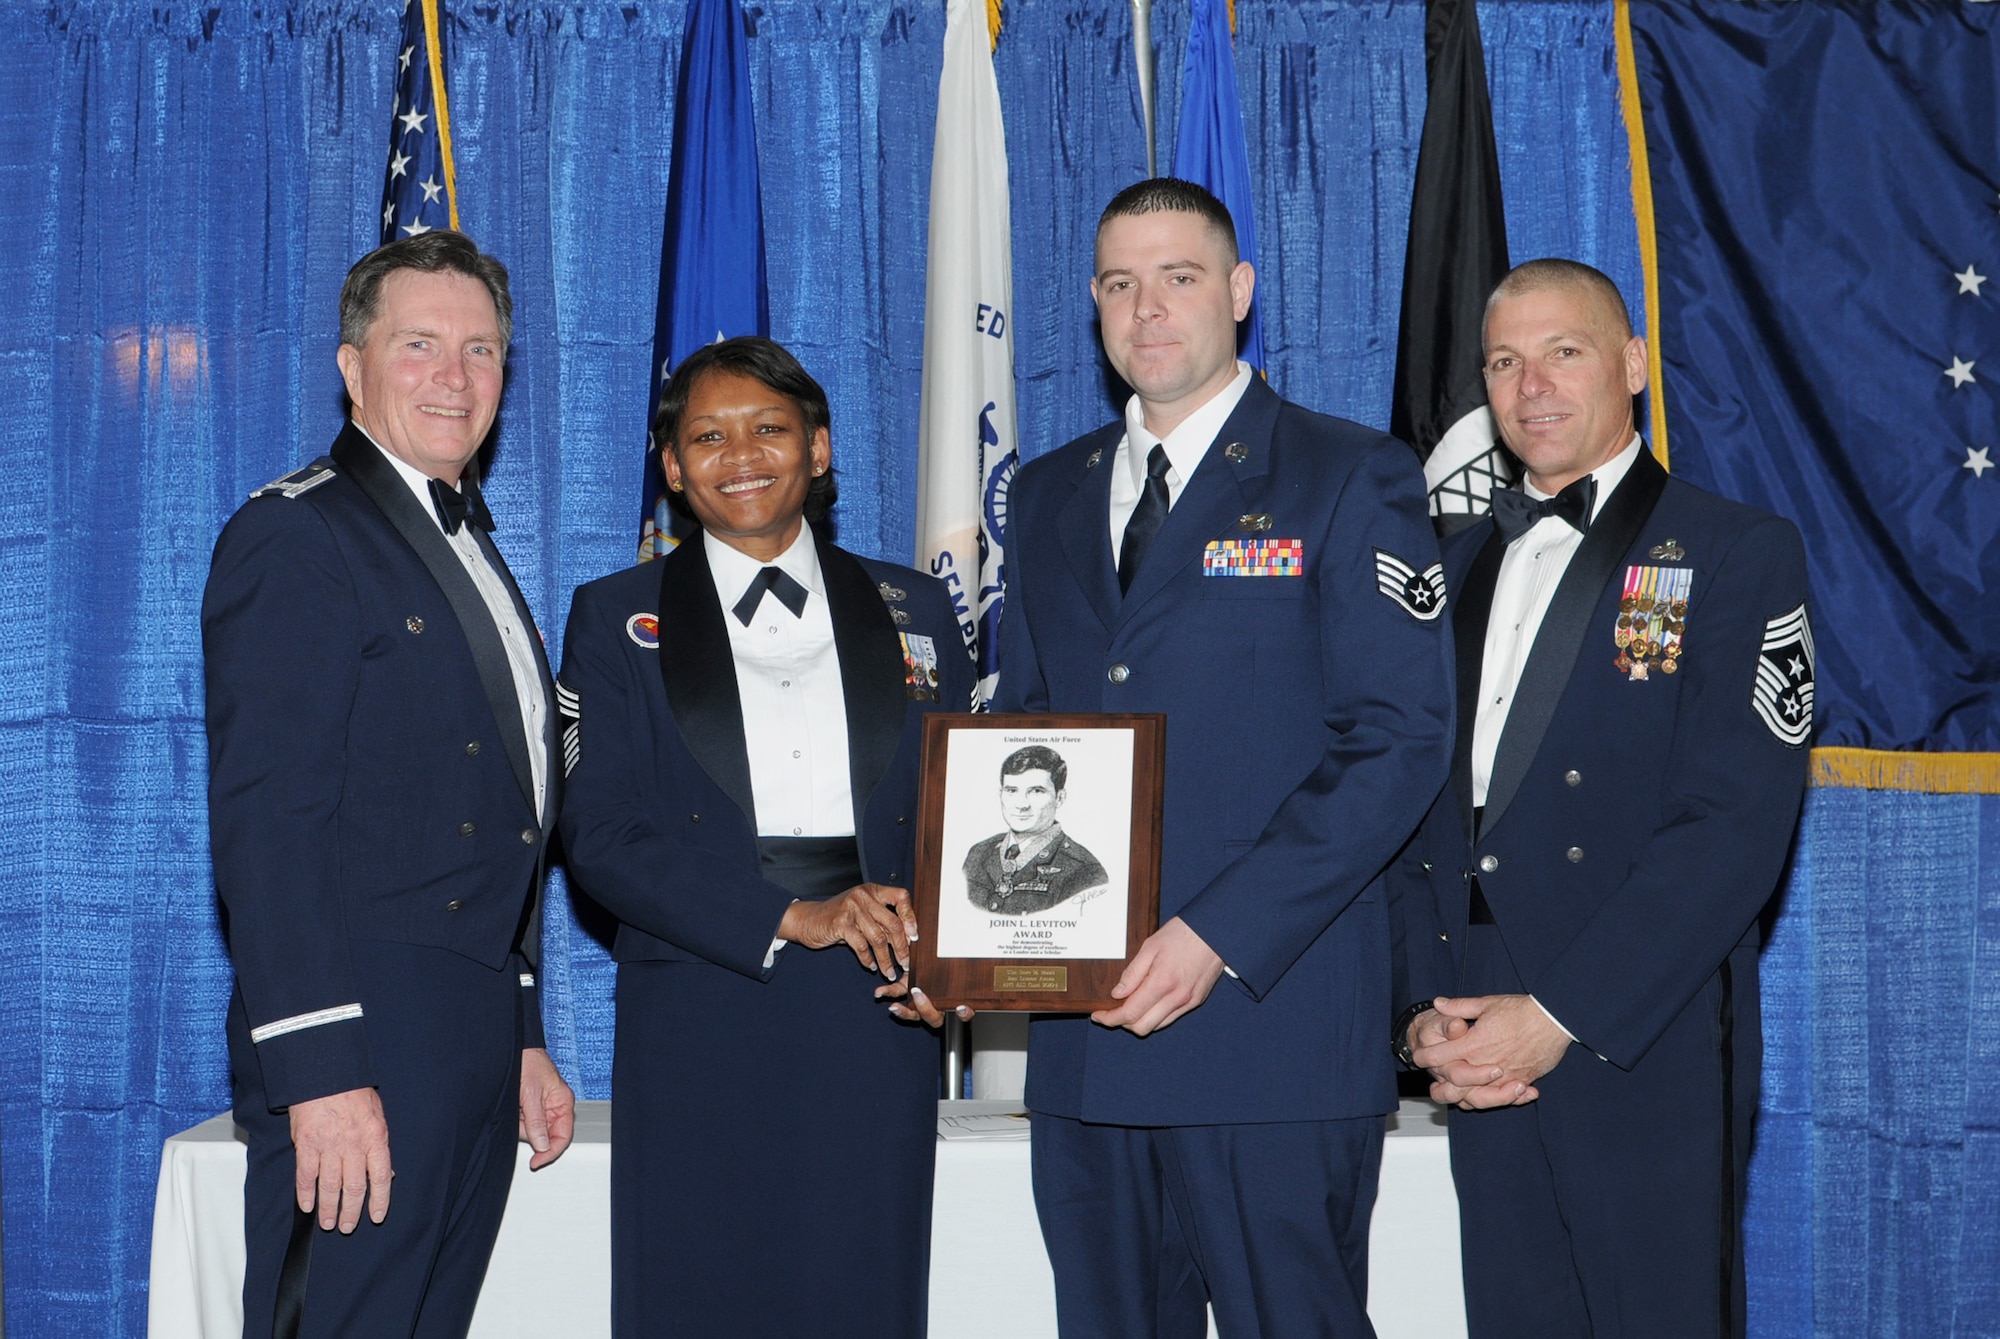 McGHEE TYSON AIR NATIONAL GUARD BASE, Tenn. -- Staff Sgt. Scott M. Moore, 2nd from right, a services craftsman with the 132nd Fighter Wing, Iowa Air National Guard, receives the John L. Levitow honor award for Airman Leadership School Class 10-1 at The Air National Guard Training and Education Center here, Feb. 11, 2010.  Also pictured L-R are Col. Richard B. Howard, Chief Master Sgt. Deborah Davidson, and Chief Master Sgt. James E. Downing, Sr. The John L. Levitow award is the highest honor awarded a graduate of any Air Force enlisted professional military education course.  (U.S. Air Force photo by Master Sgt. Kurt Skoglund/Released)